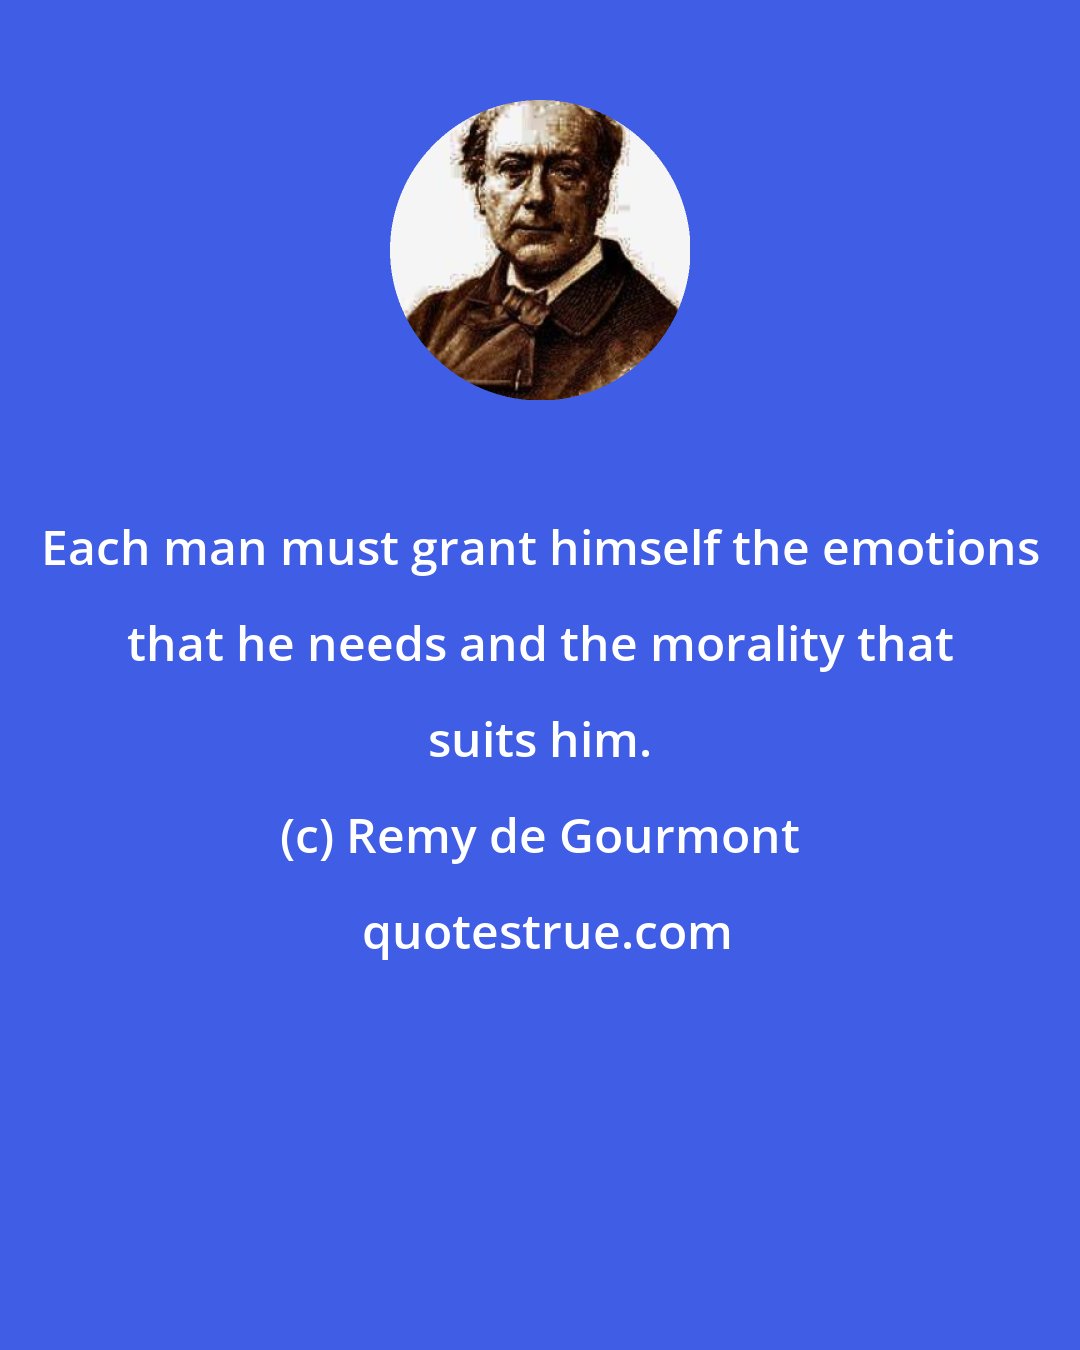 Remy de Gourmont: Each man must grant himself the emotions that he needs and the morality that suits him.